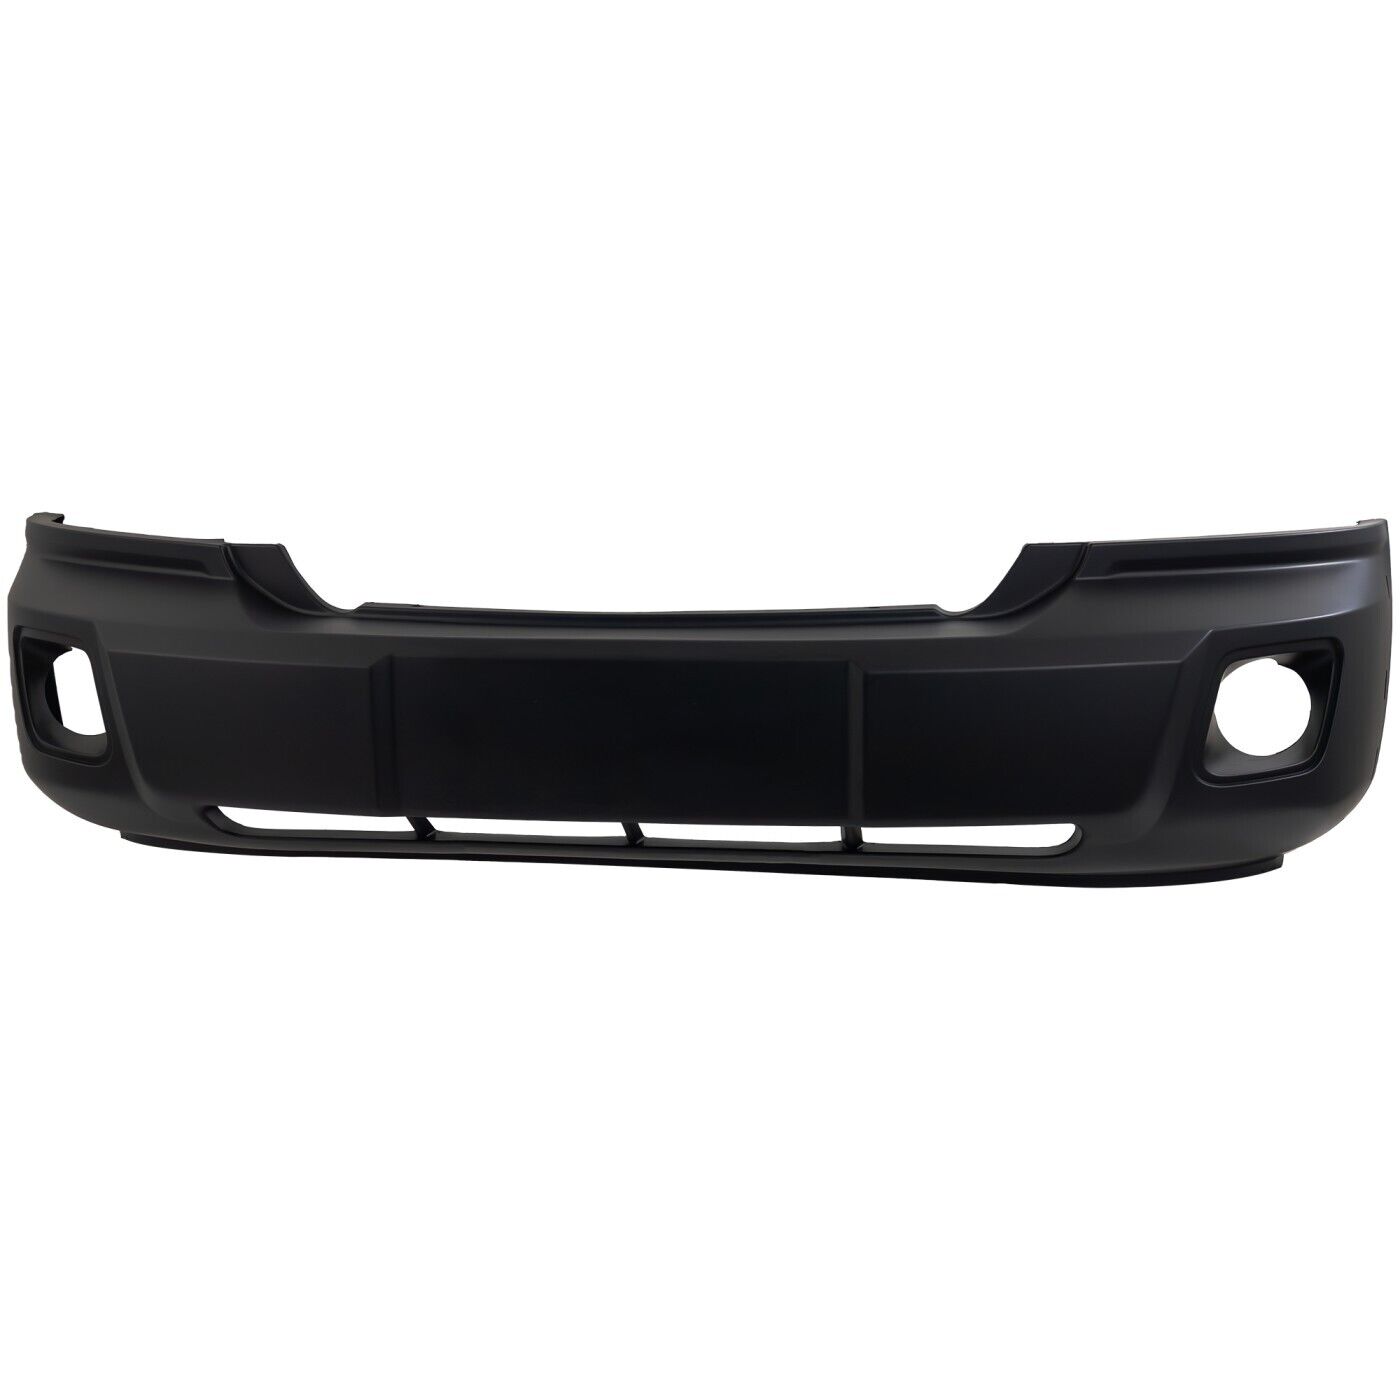 2008-2011 DODGE DAKOTA; Front Bumper Cover; w/o Tow Code MLH Painted to Match